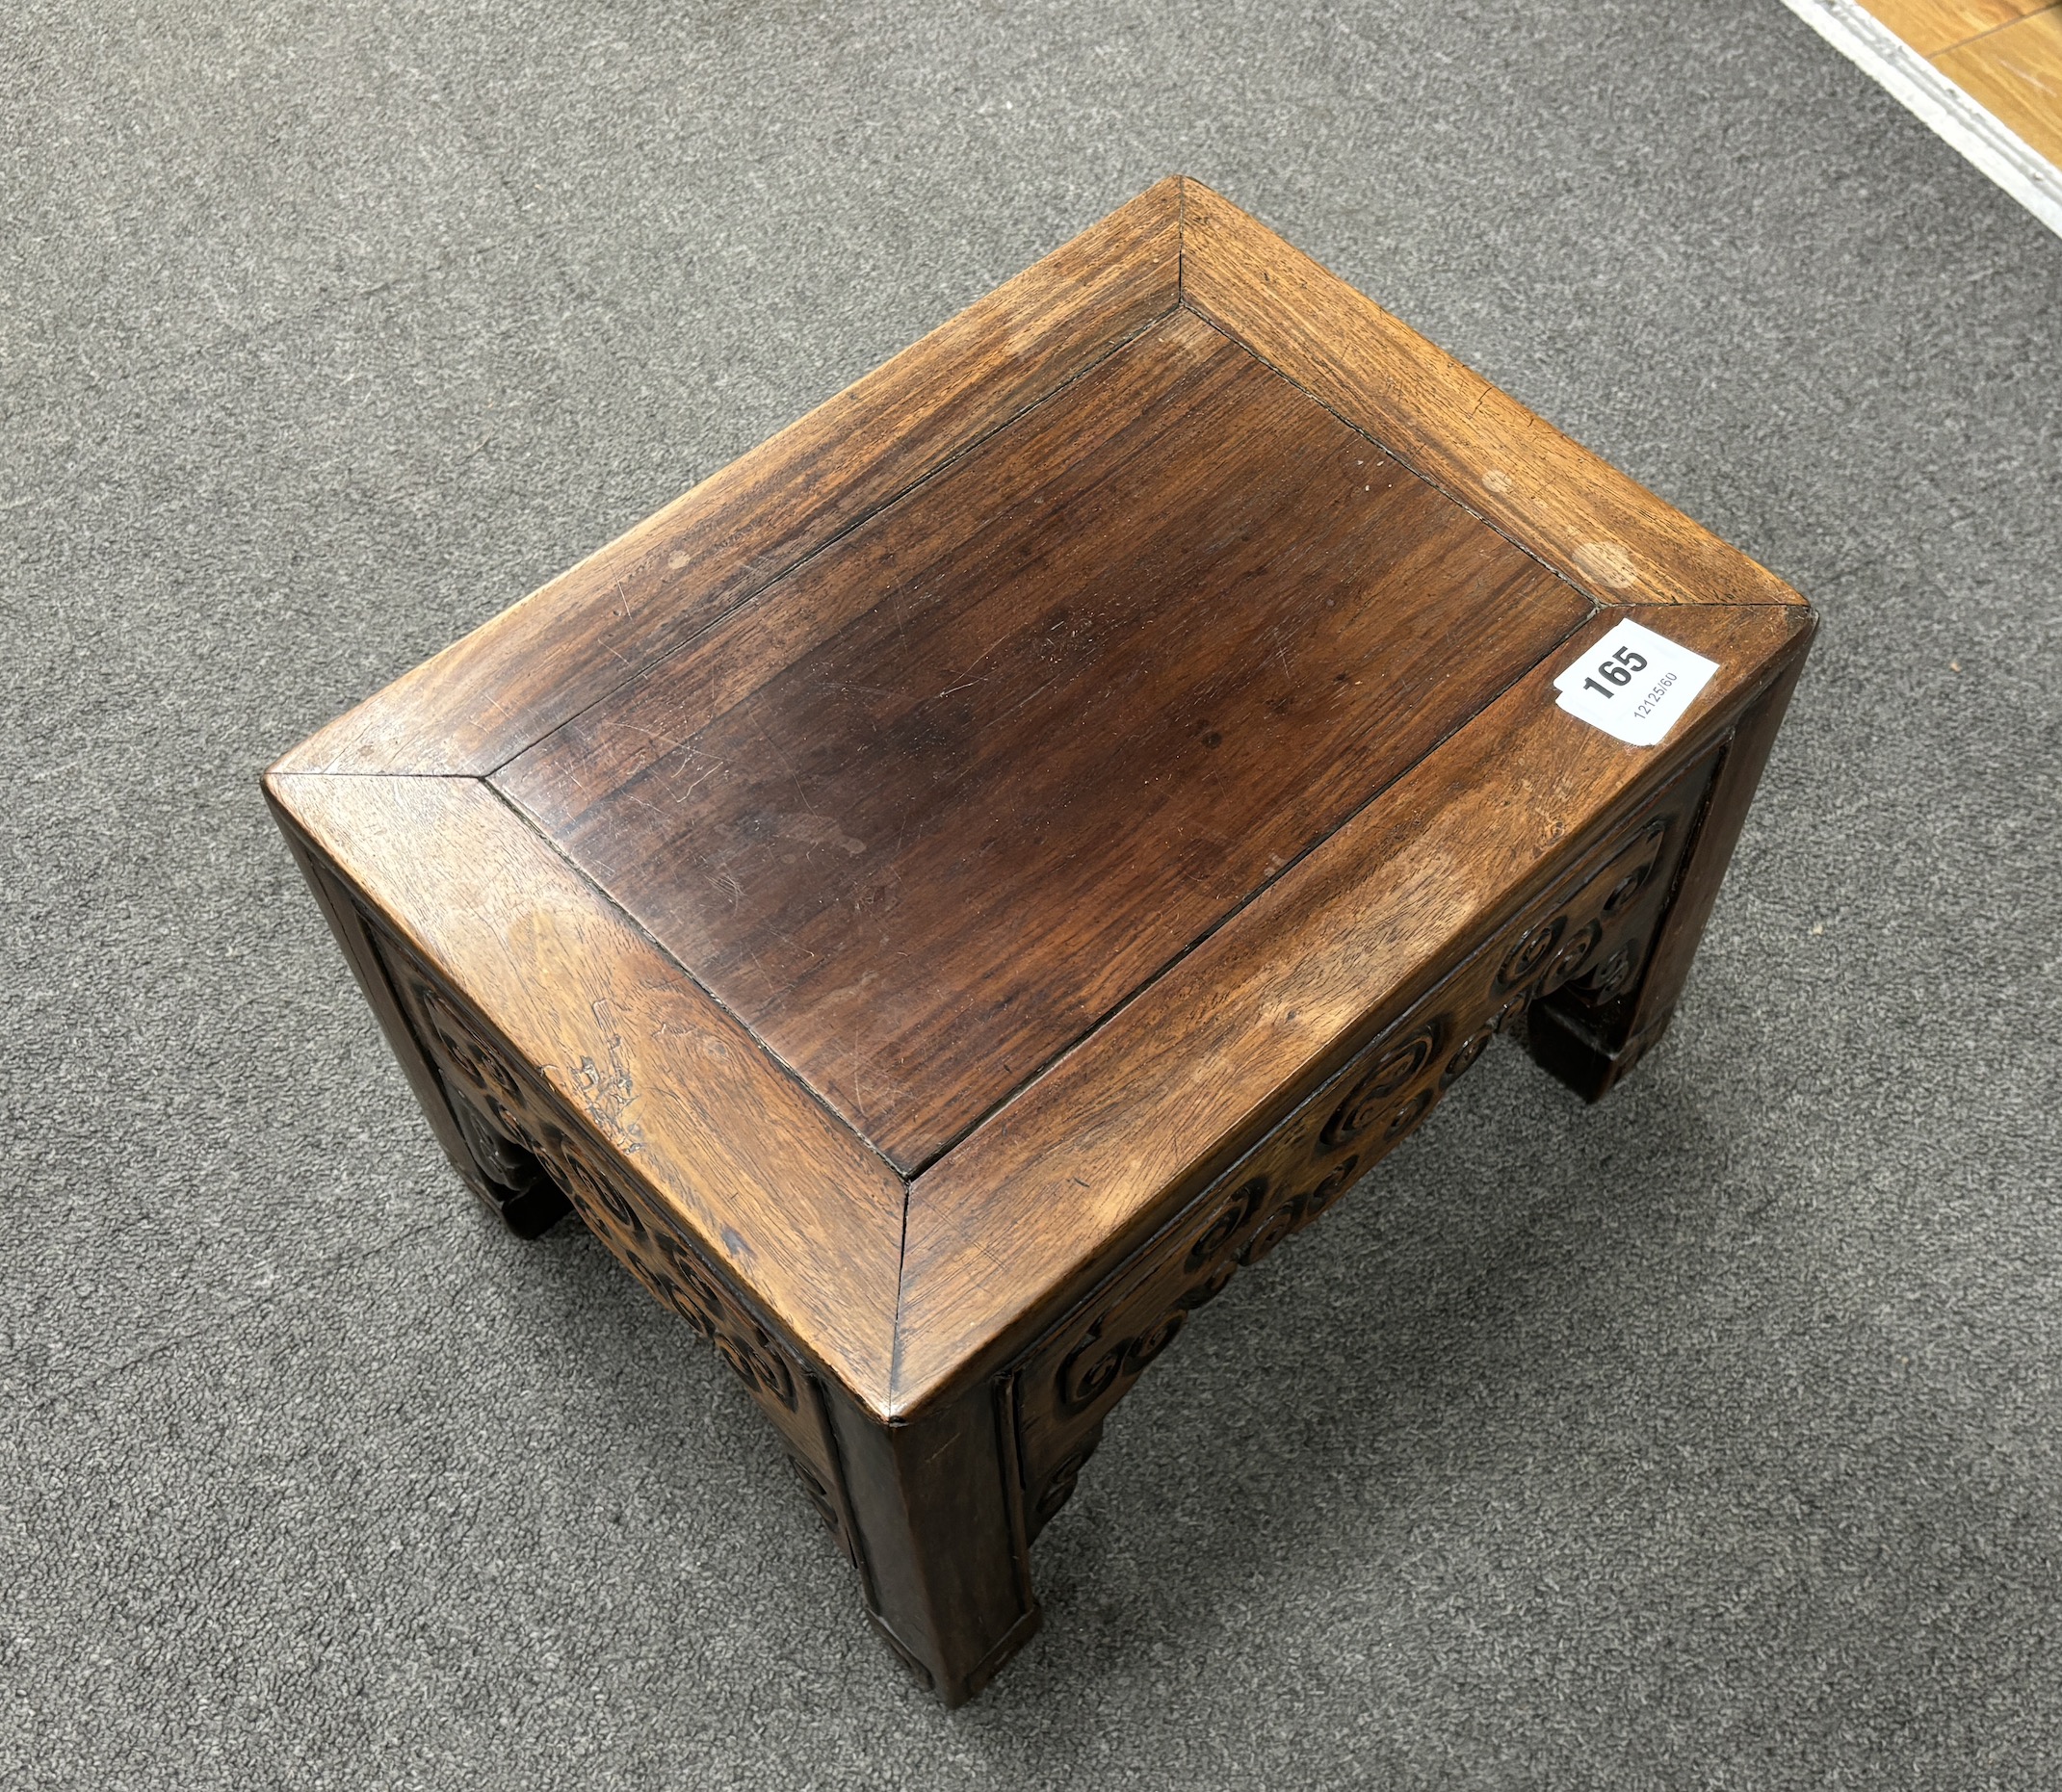 A Chinese low rectangular hardwood stand carved with scrolls, width 37cm, depth 28cm, height 26cm